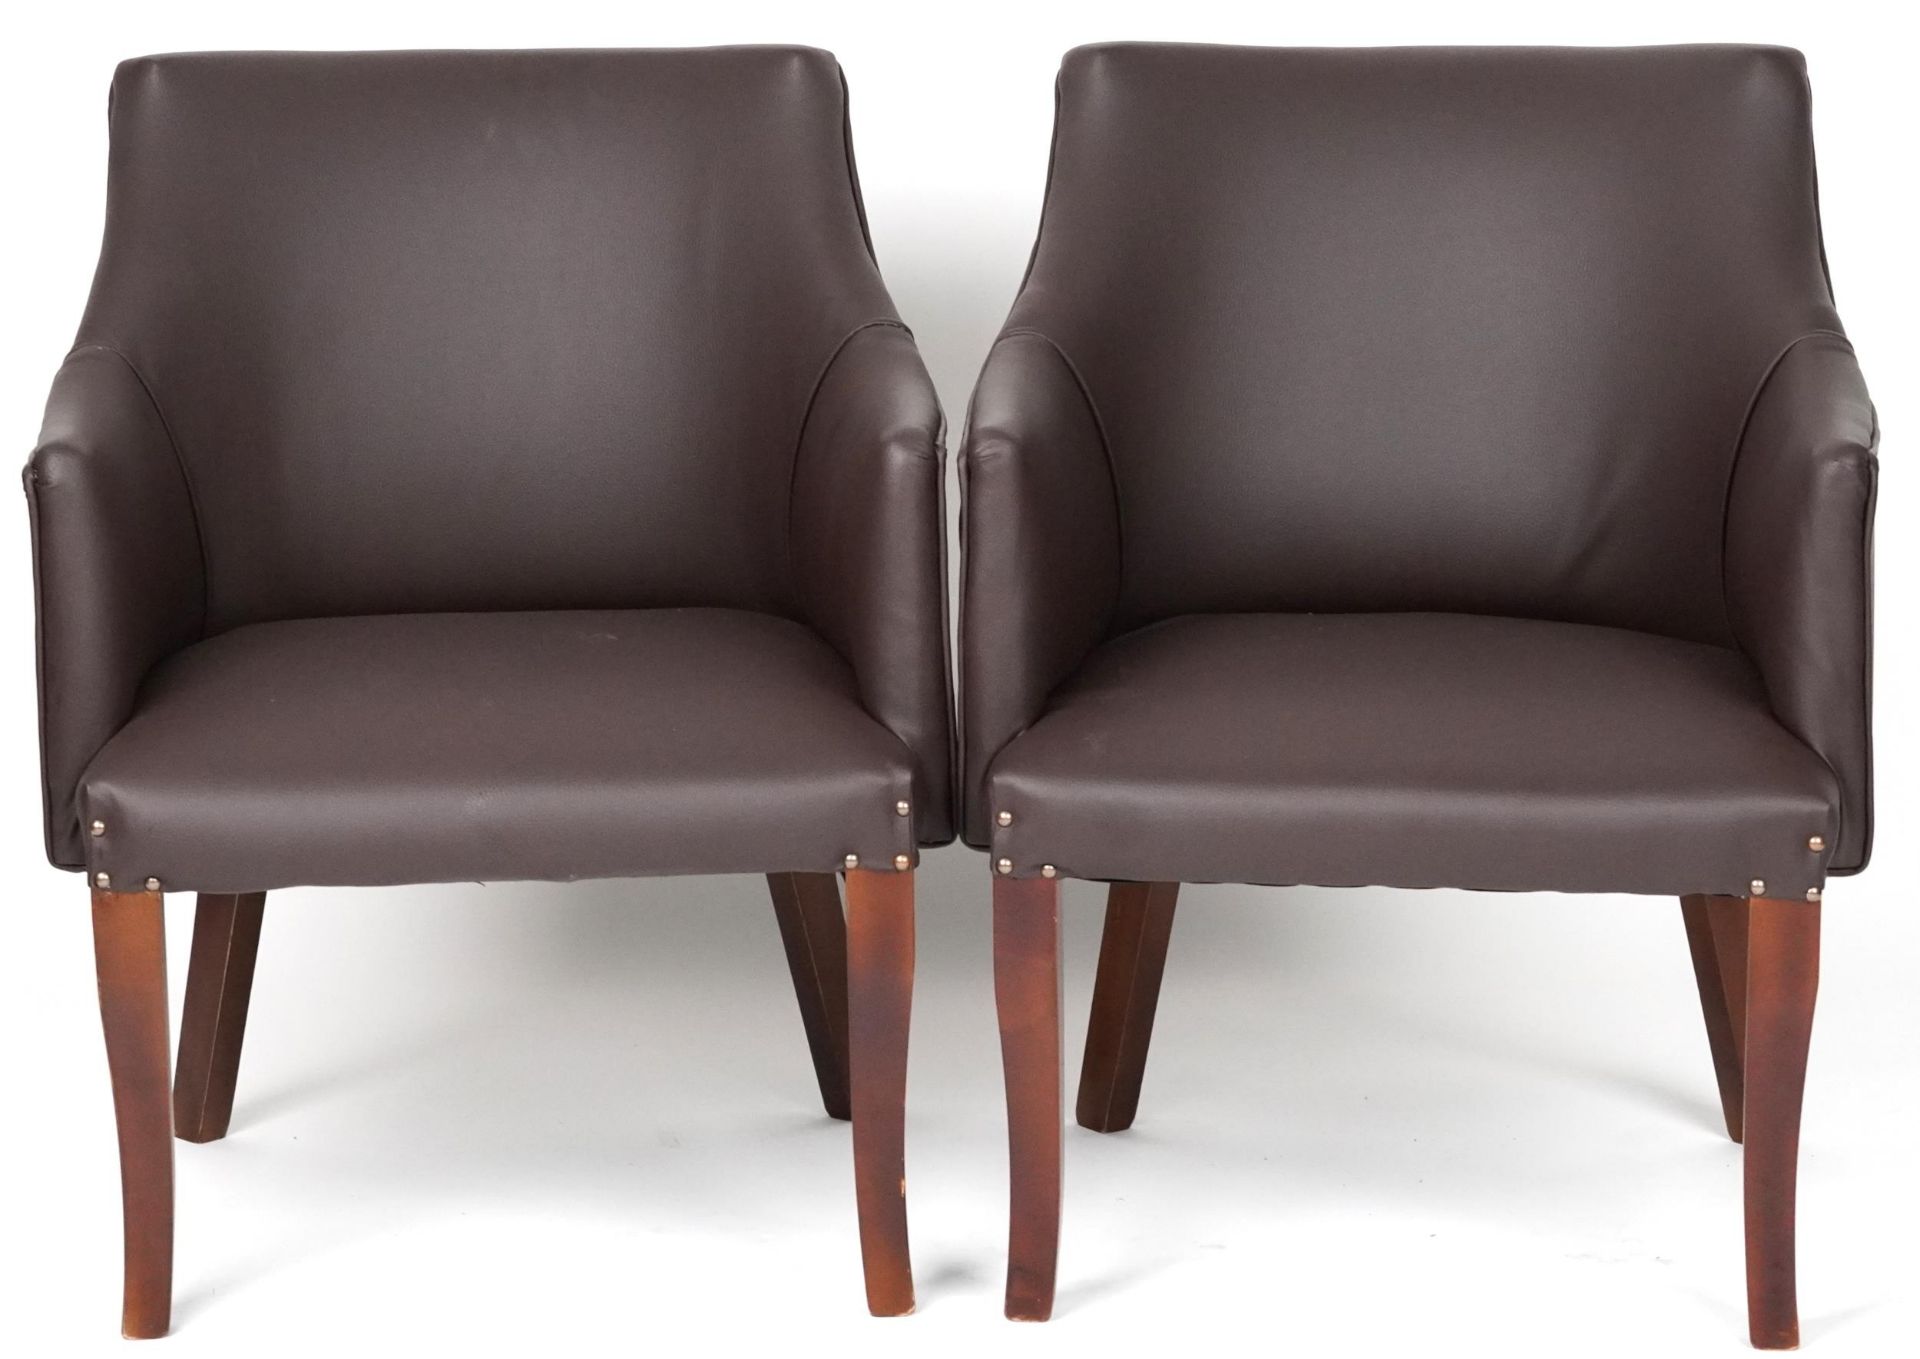 Pair of contemporary brown faux leather tub chairs, each 76cm high - Image 2 of 4